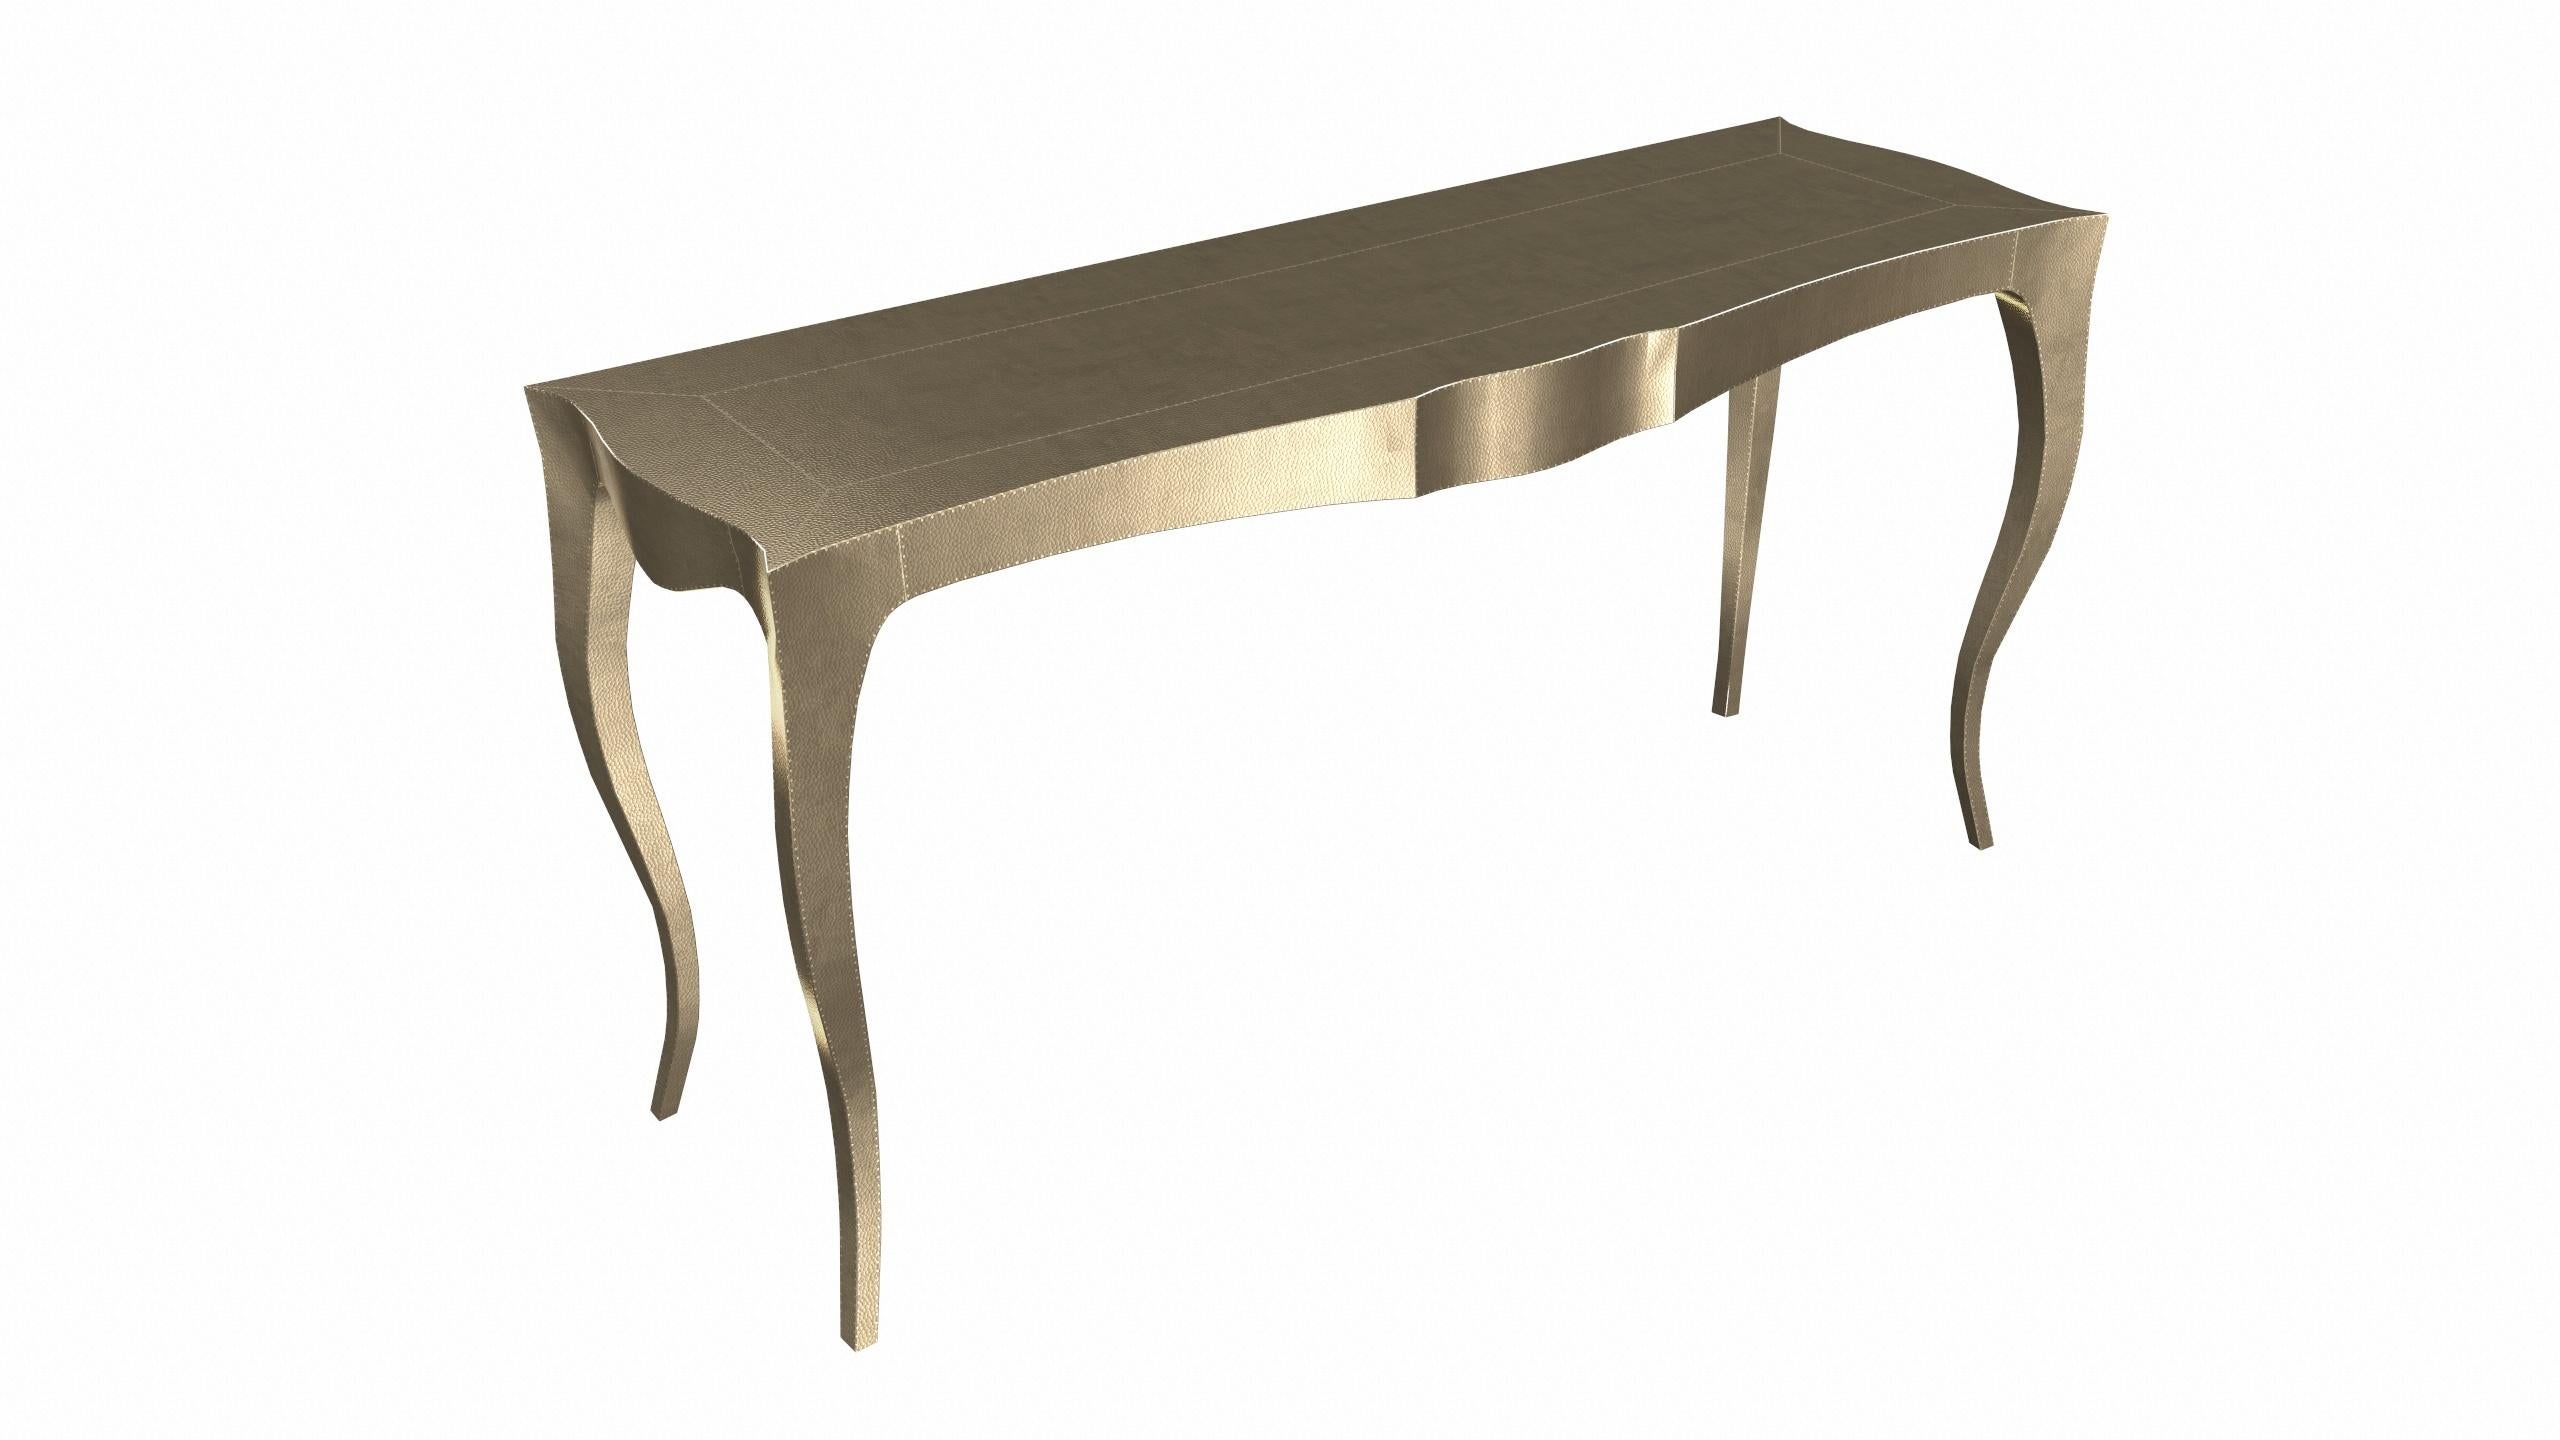 Hand-Carved Louise Console Art Nouveau Tray Tables Mid. Hammered Brass by Paul Mathieu For Sale